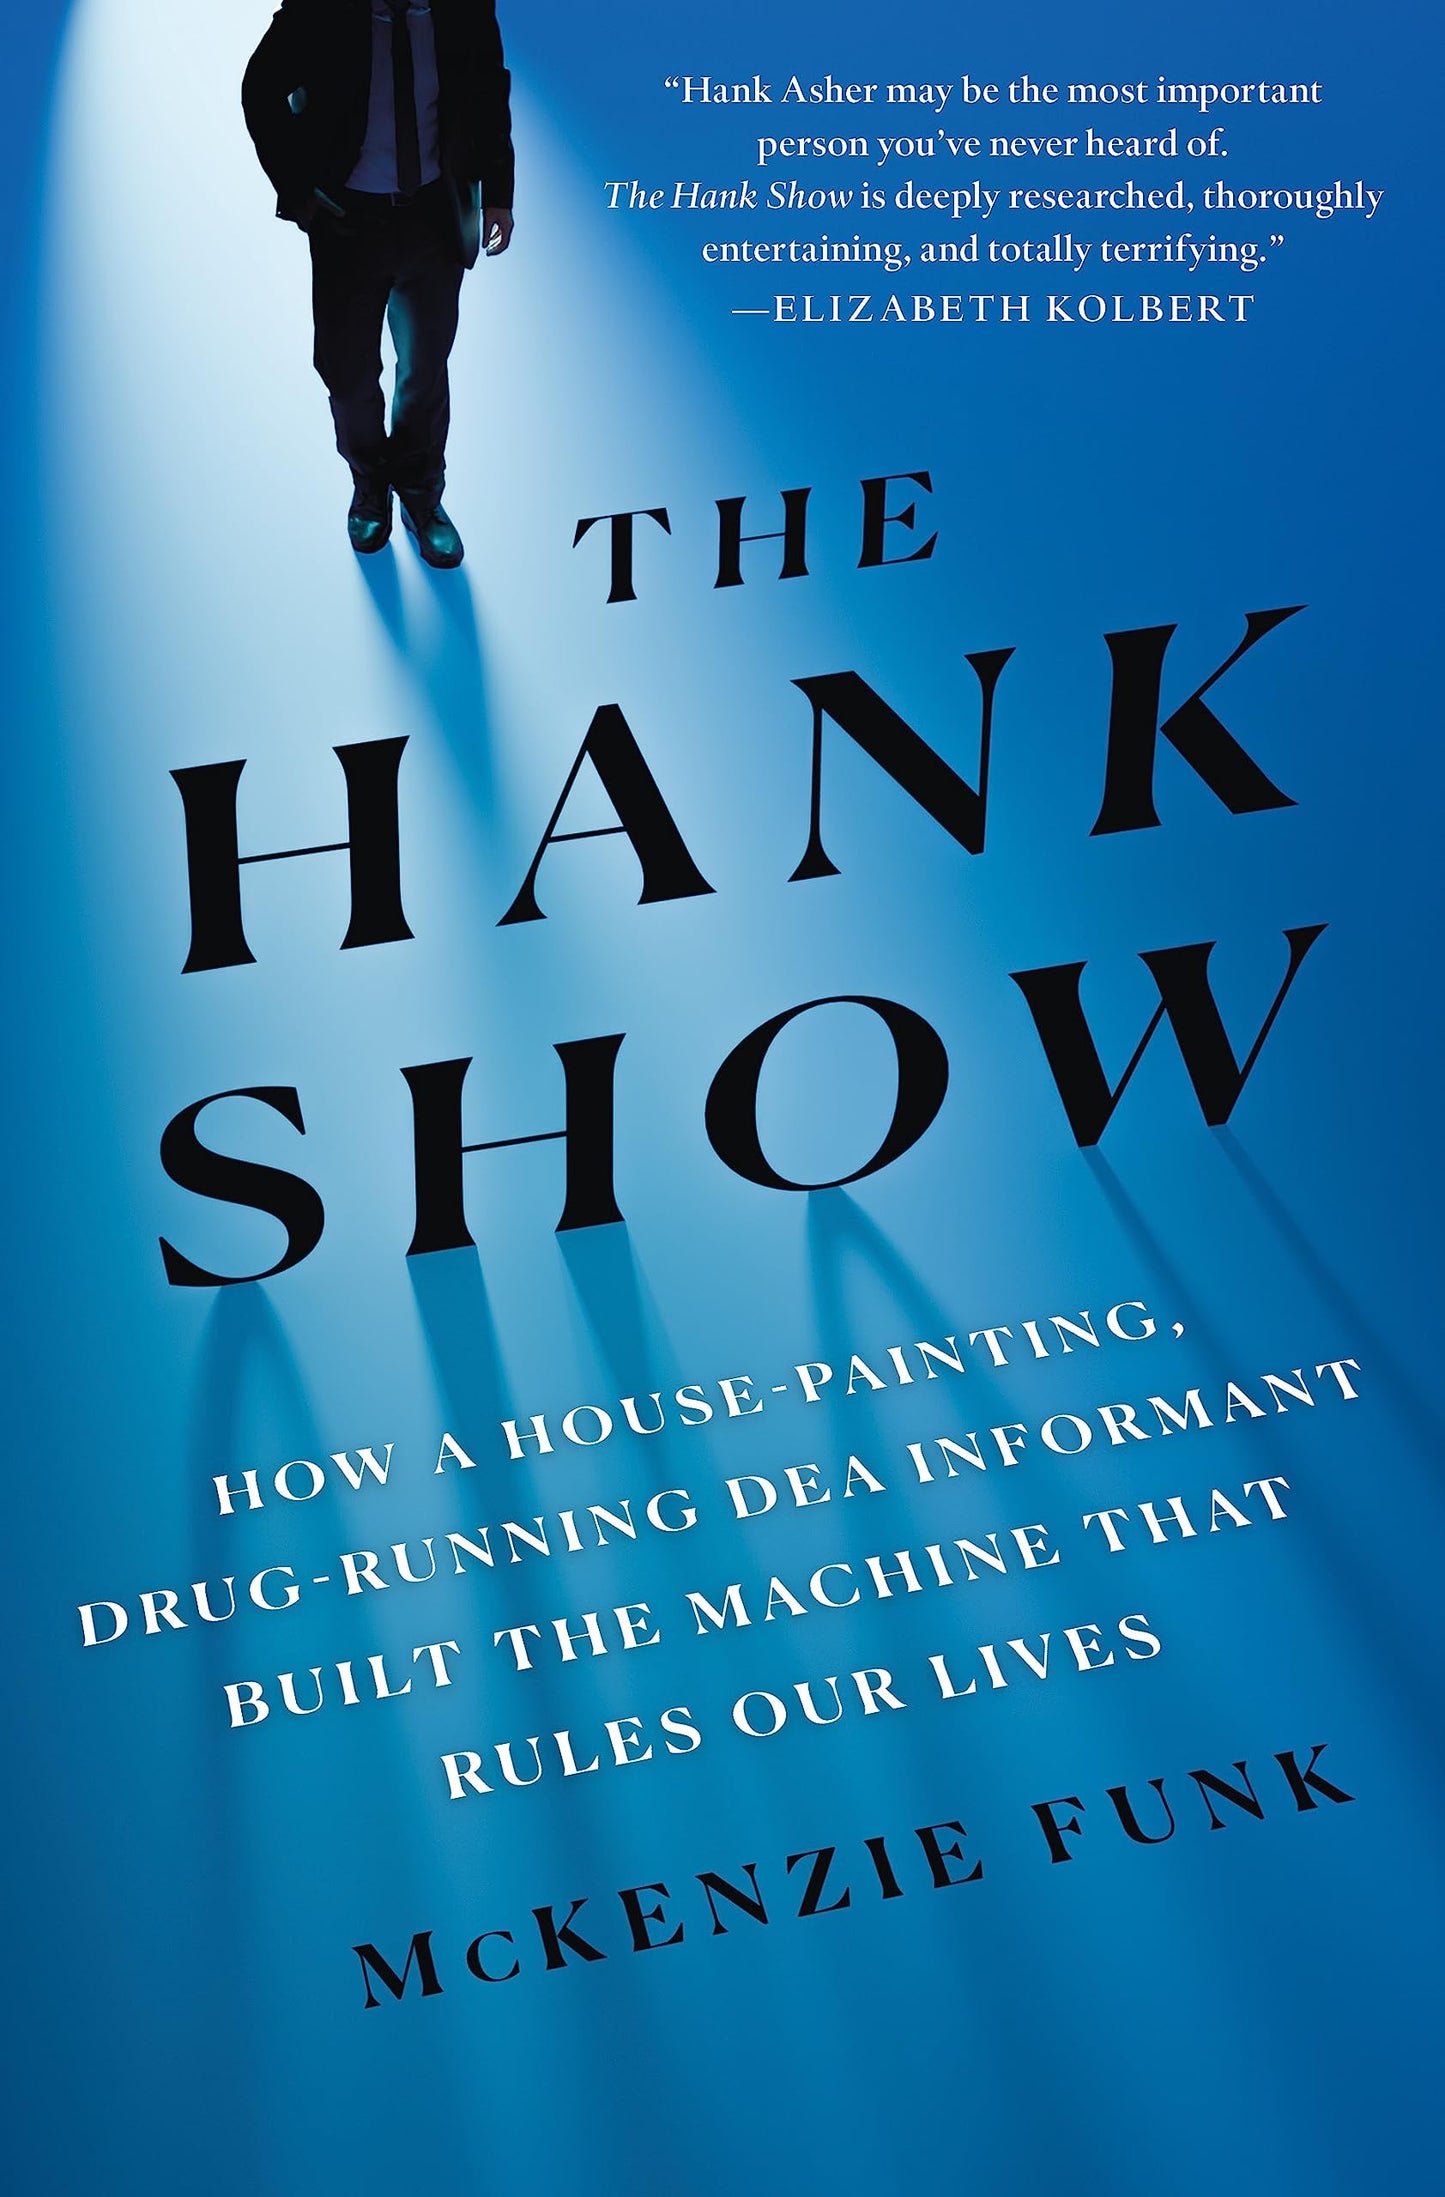 Hank Show: How a House-Painting, Drug-Running Dea Informant Built the Machine That Rules Our Lives